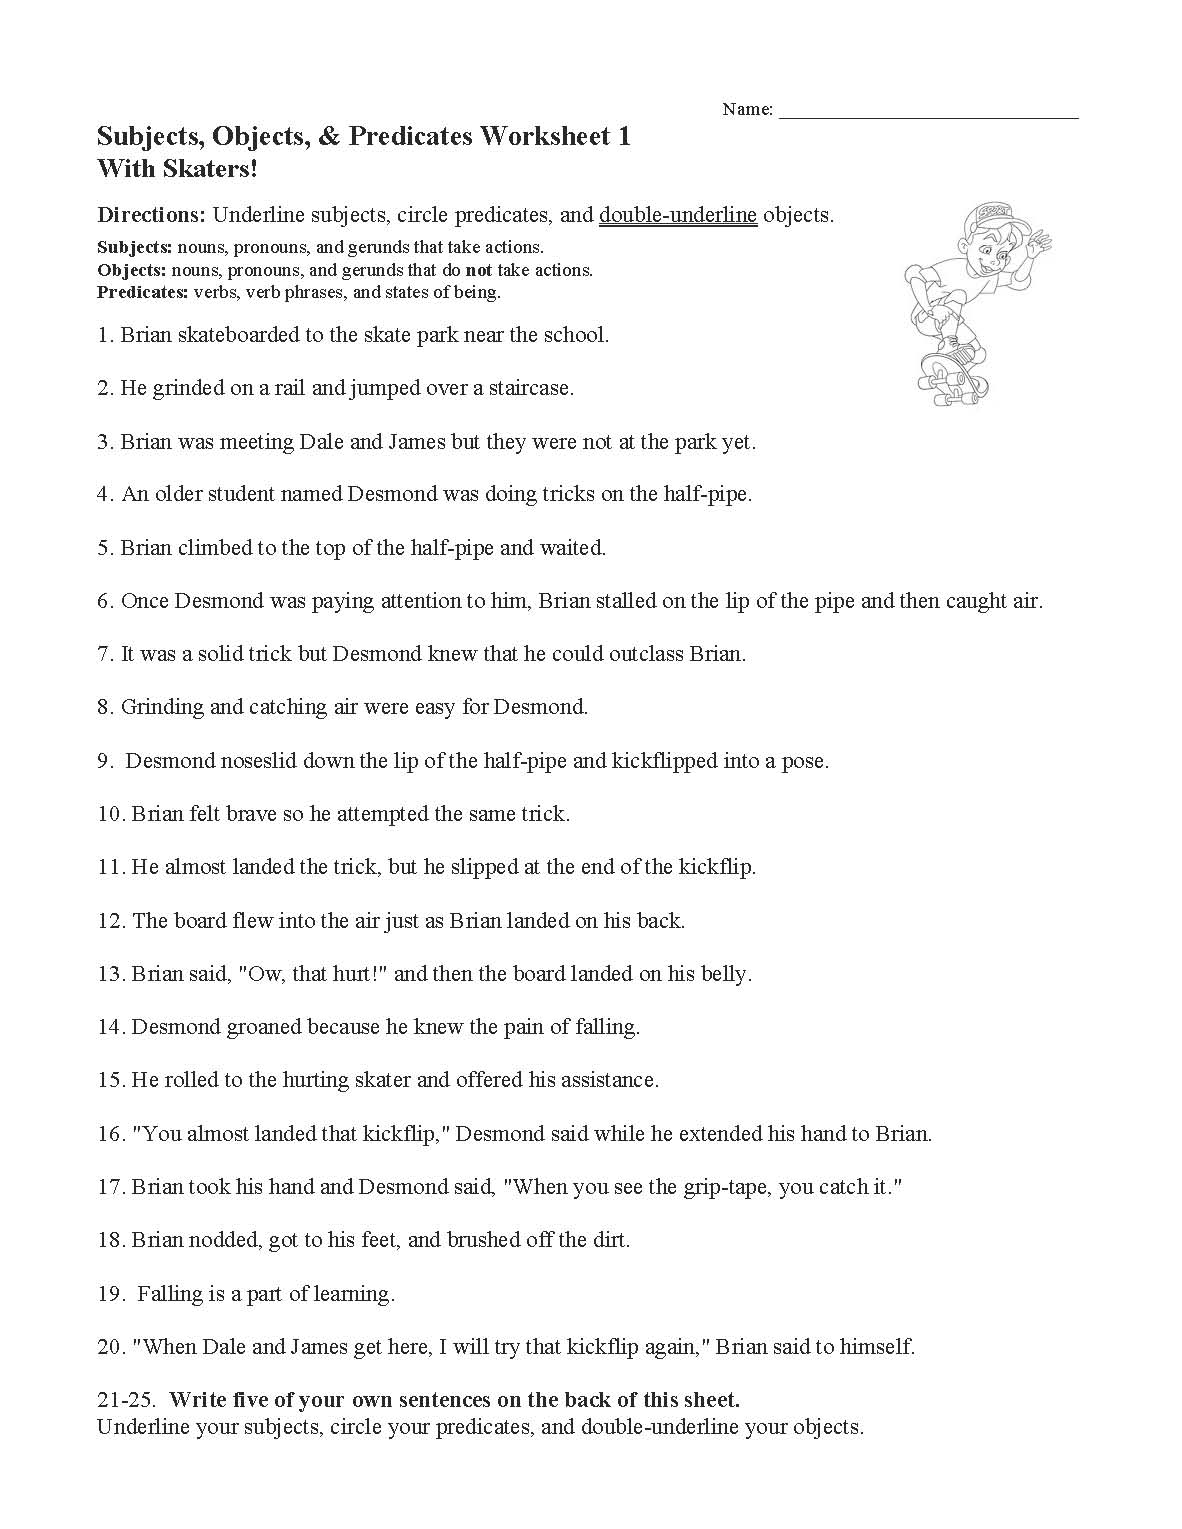 Subjects, Objects, and Predicates with Skaters Worksheet Within Subject Predicate Worksheet Pdf